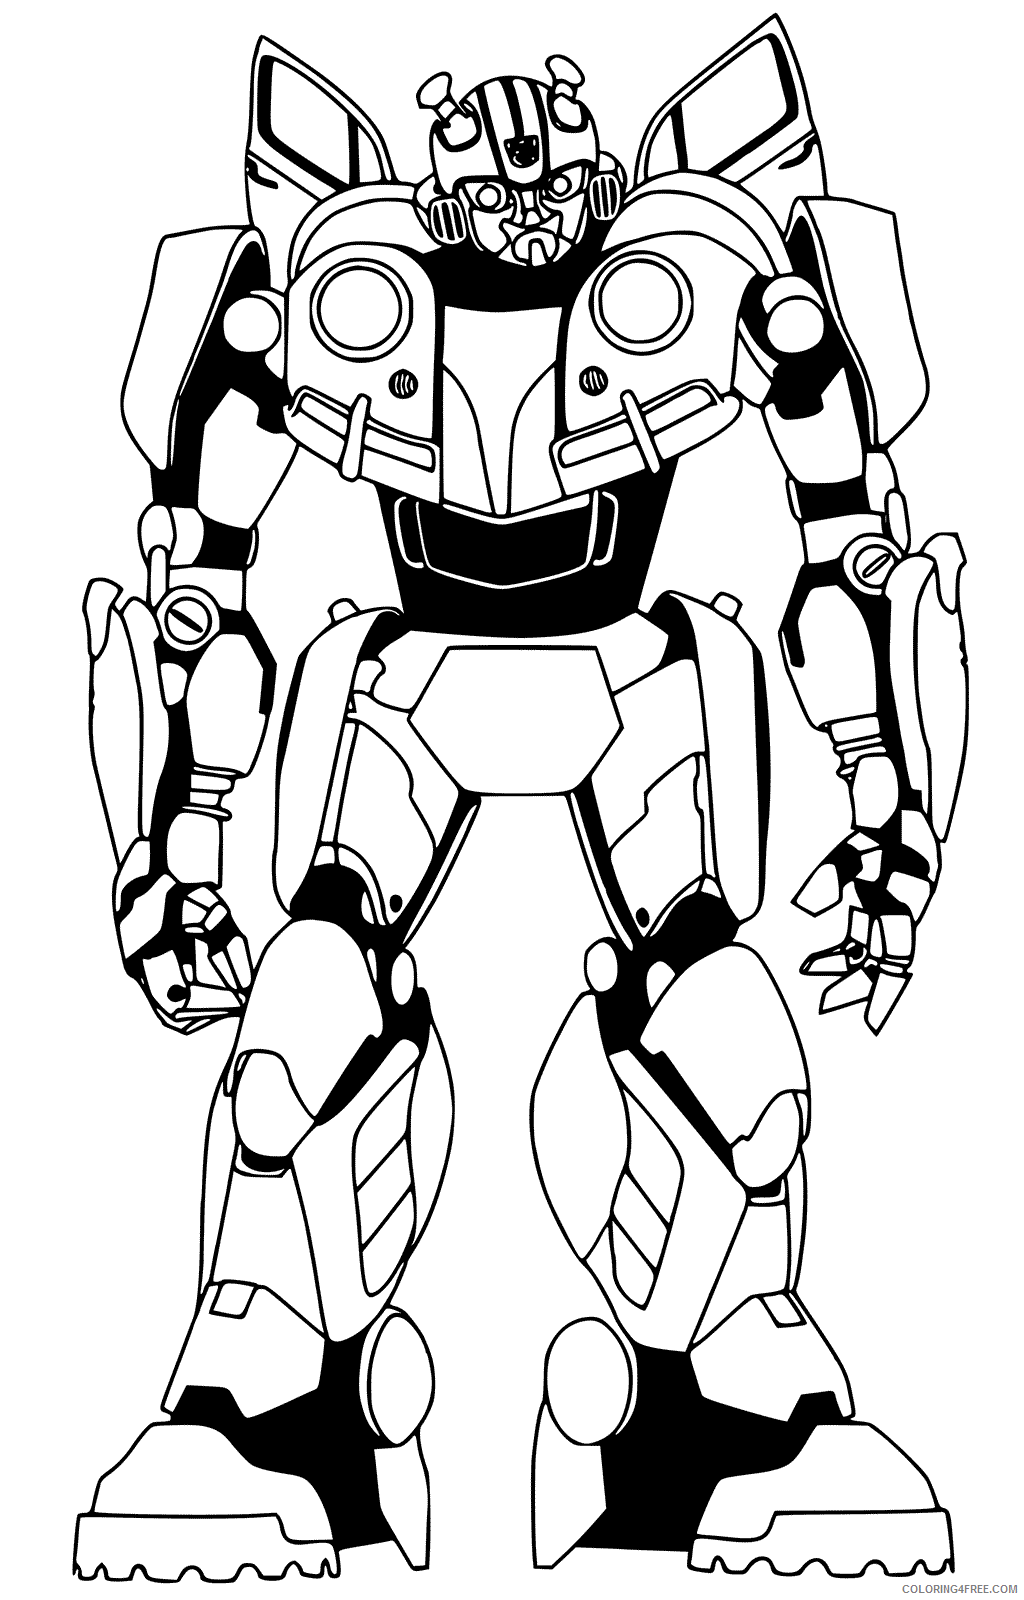 Transformers Coloring Pages TV Film Bumblebee Transformer Printable 2020 10563 Coloring4free